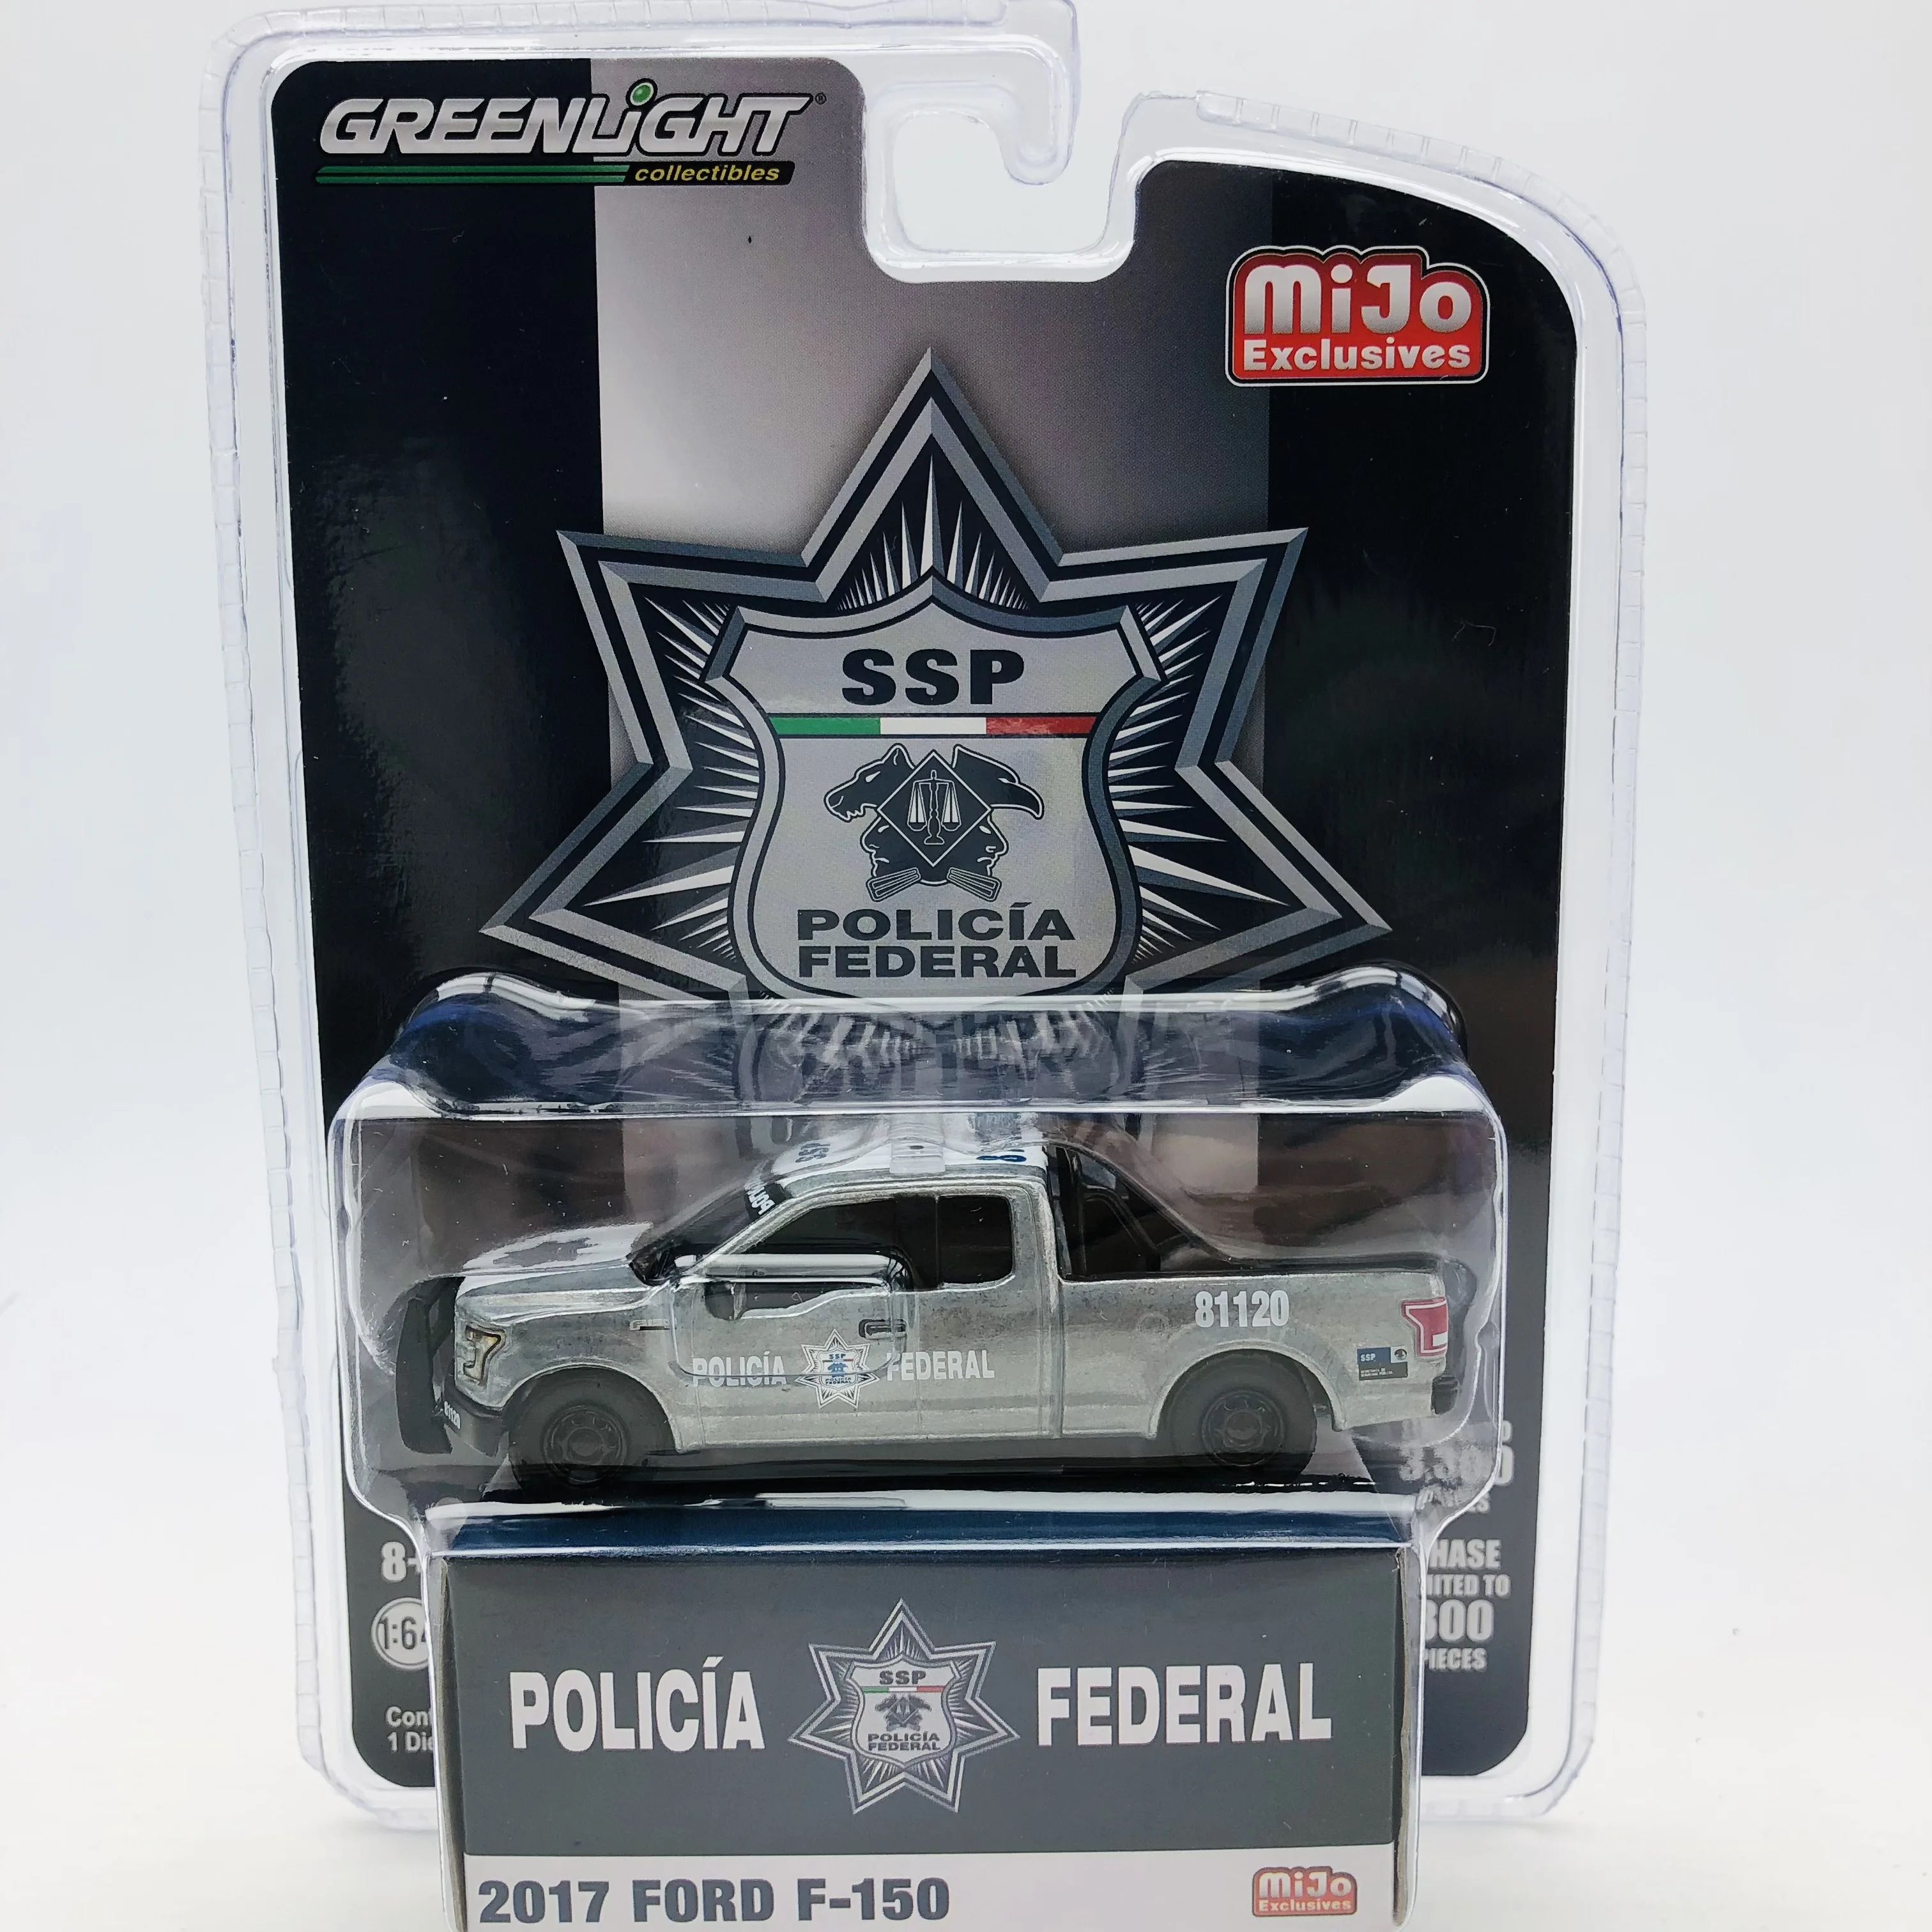 

1/64 GreenLight 2017 Ford F-150 Mexican Police Pickup Mijo Limited Collection of die-cast alloy car models